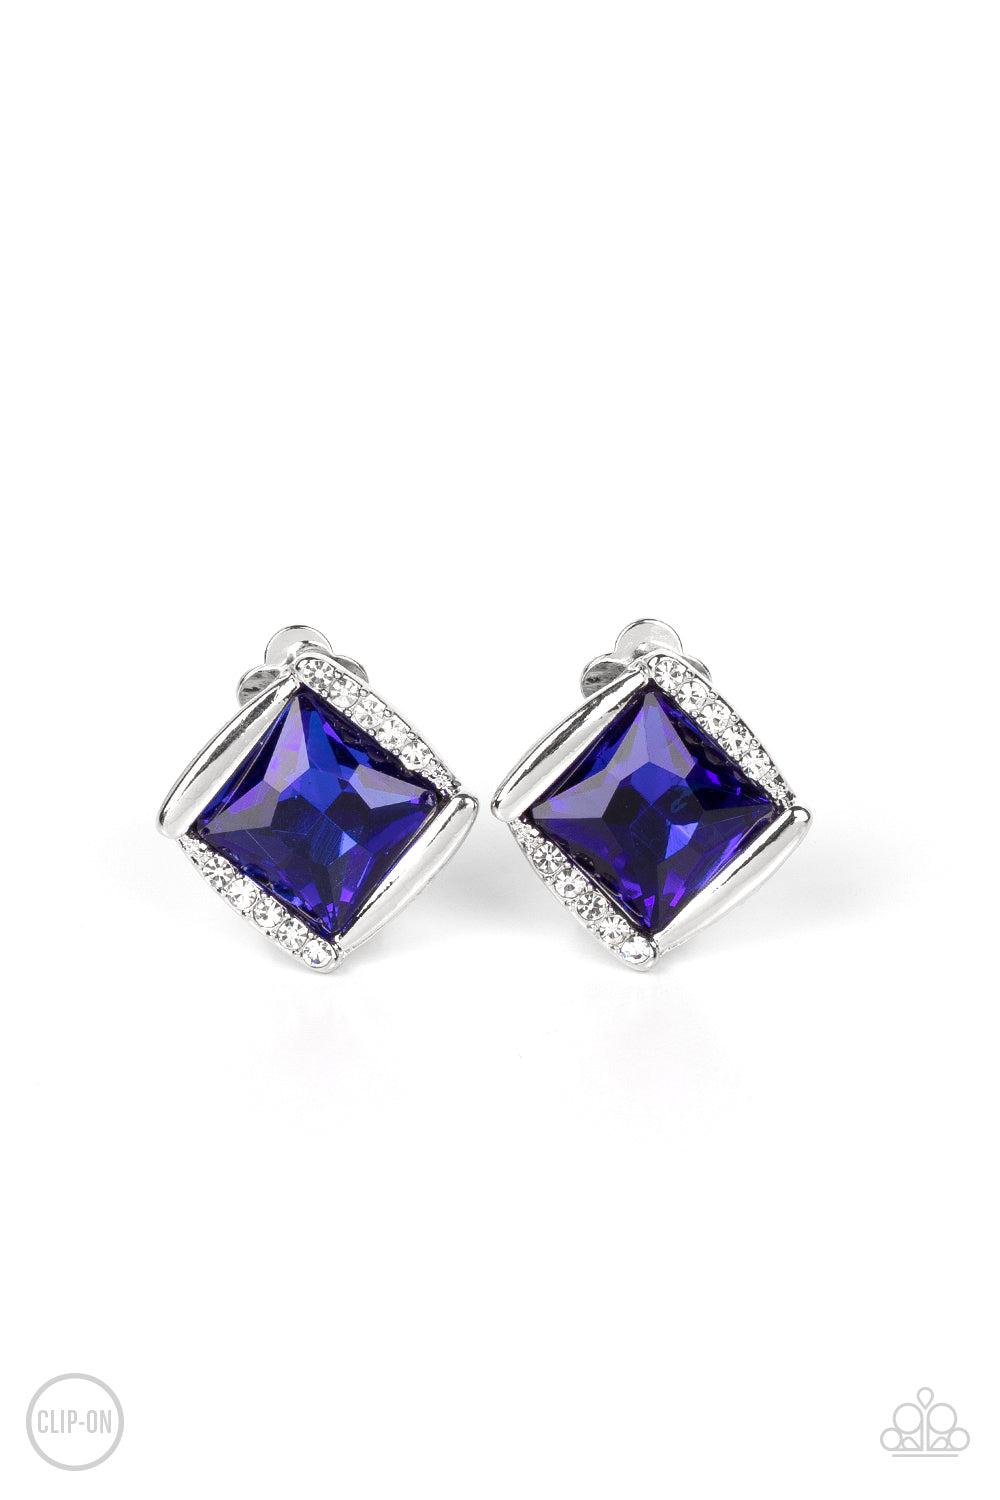 Sparkle Squared Blue & White Rhinestone Clip-on Earrings - Paparazzi Accessories- lightbox - CarasShop.com - $5 Jewelry by Cara Jewels